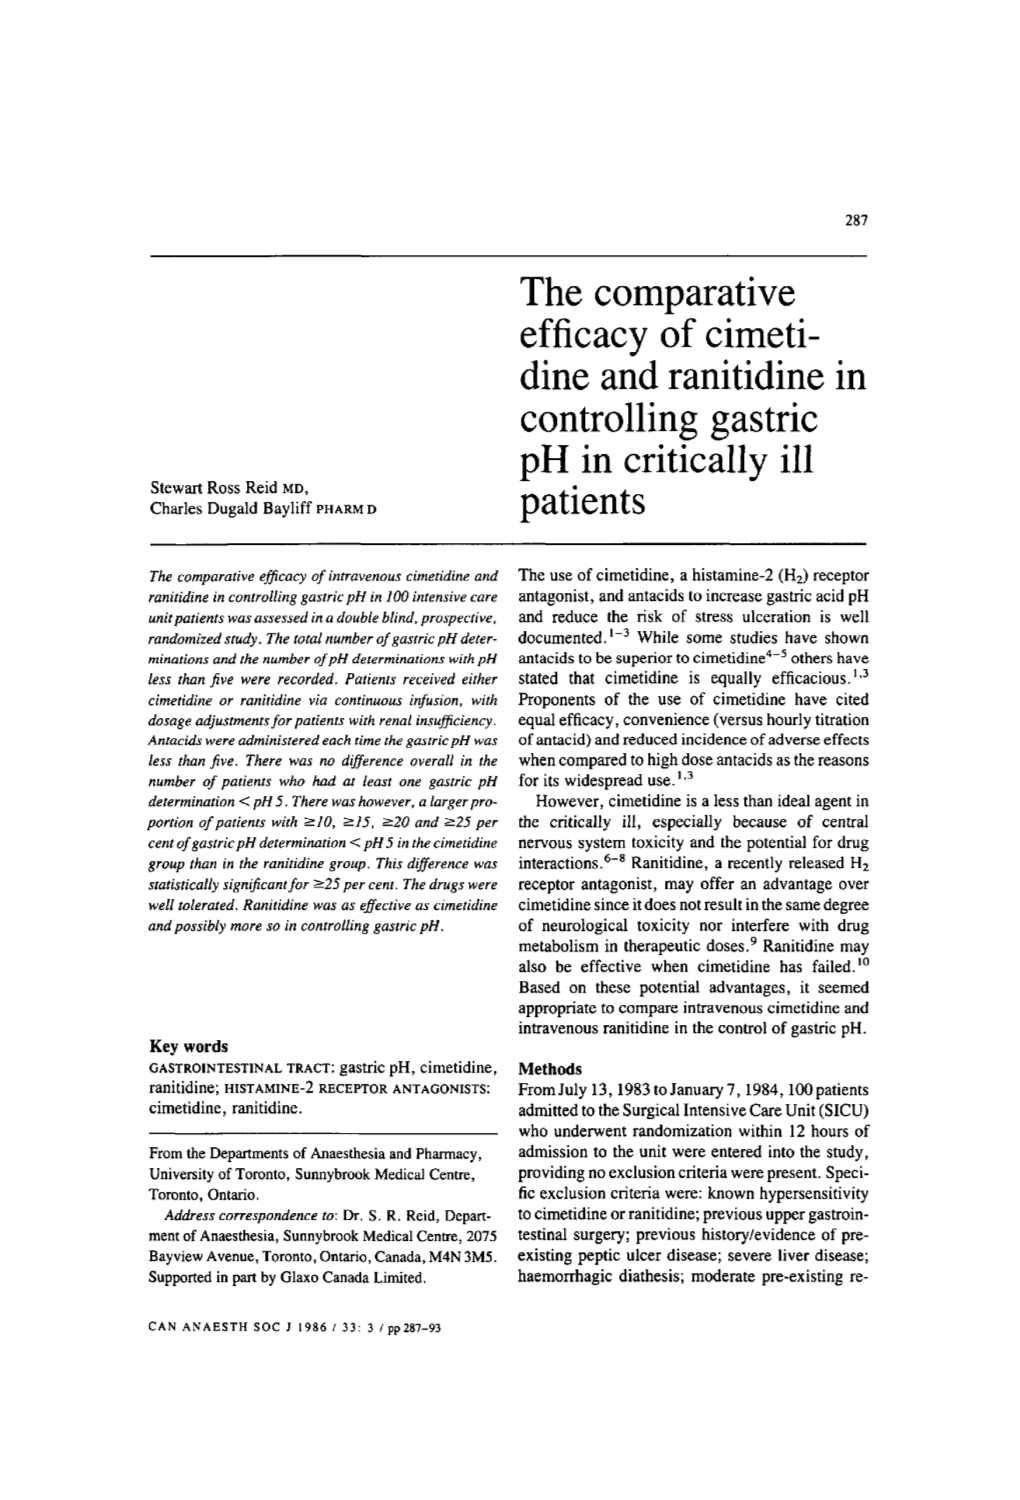 The Comparative Efficacy of Cimetidine and Ranitidine in Controlling Gastric